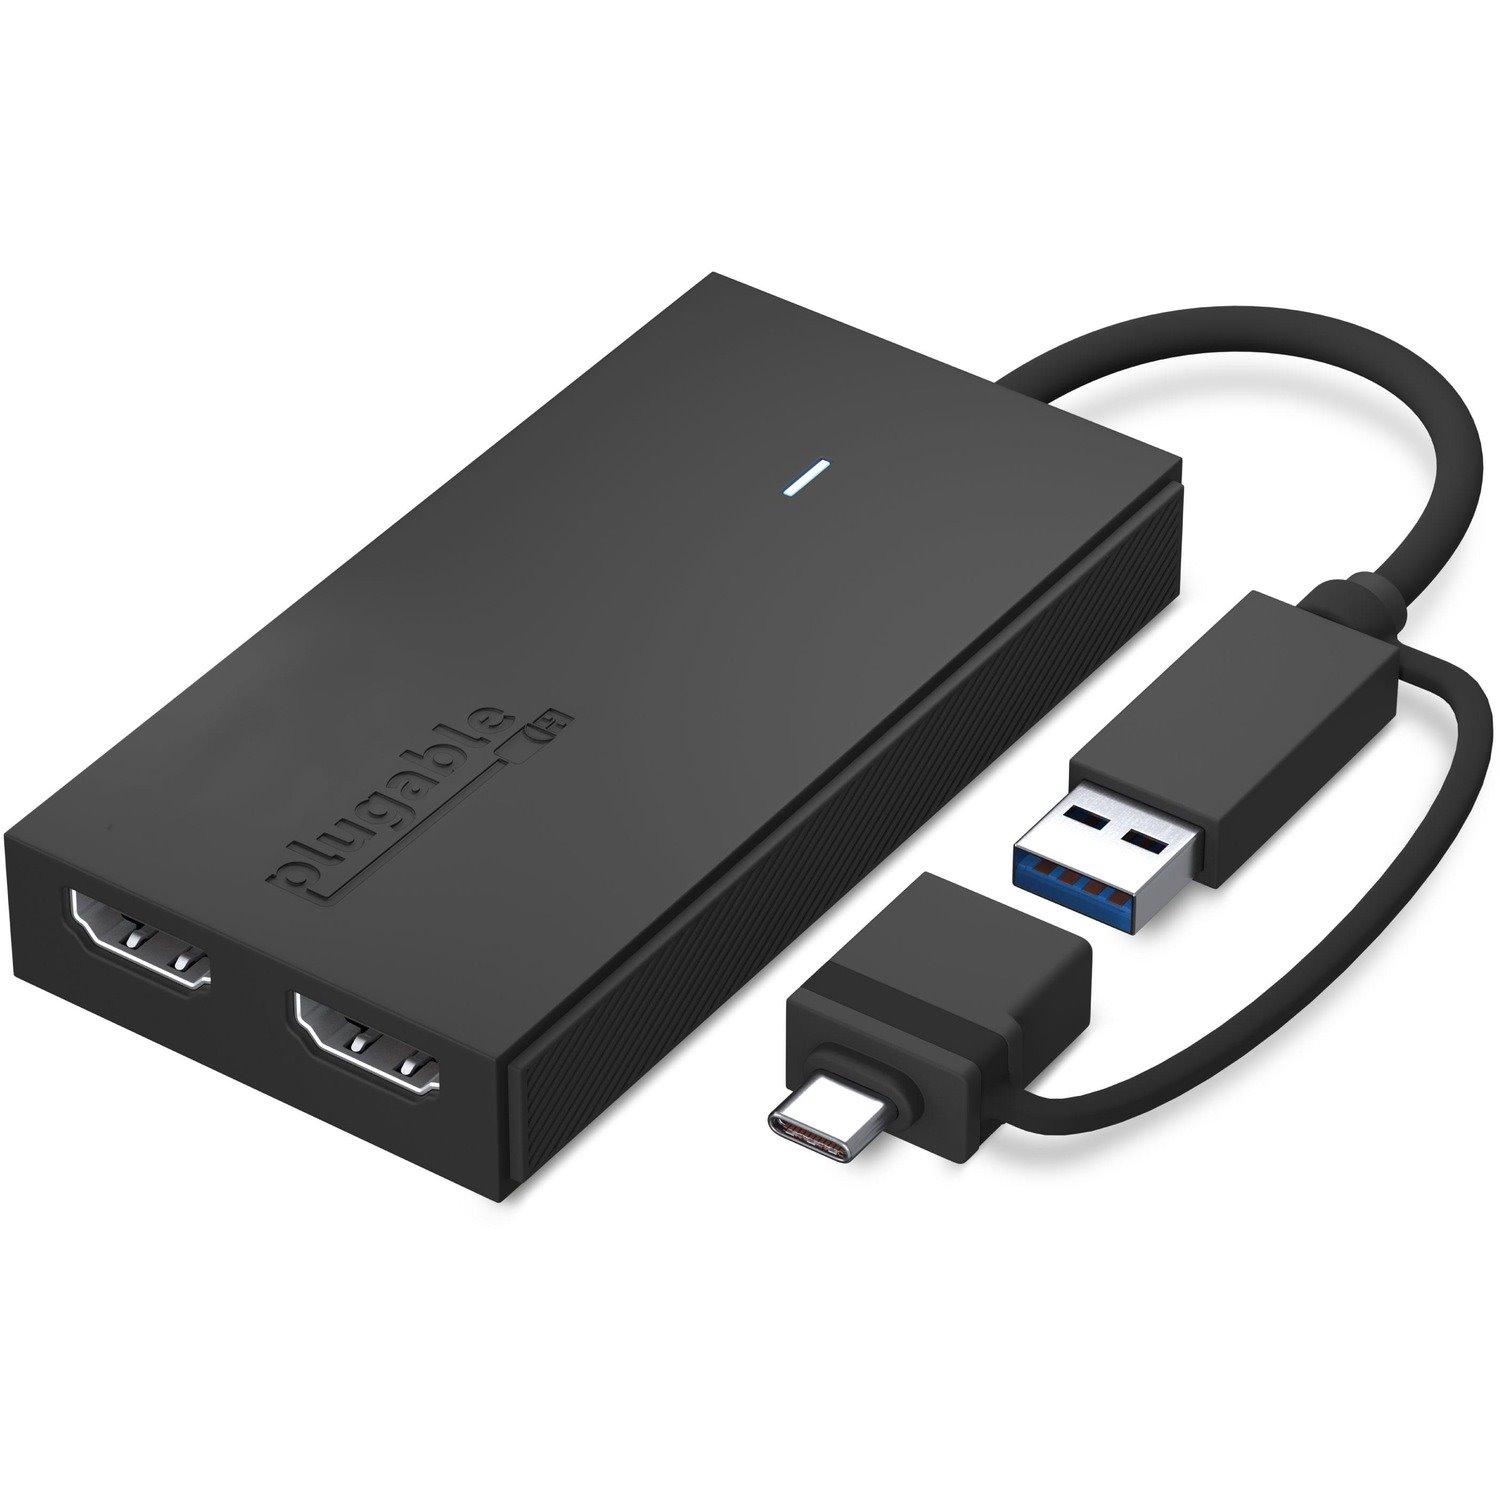 Plugable USB 3.0 or USB C to HDMI Adapter for Dual Monitors, Universal Video Graphics Adapter for Mac and Windows, Thunderbolt 3 / 4, USB 3.0 or USB-C